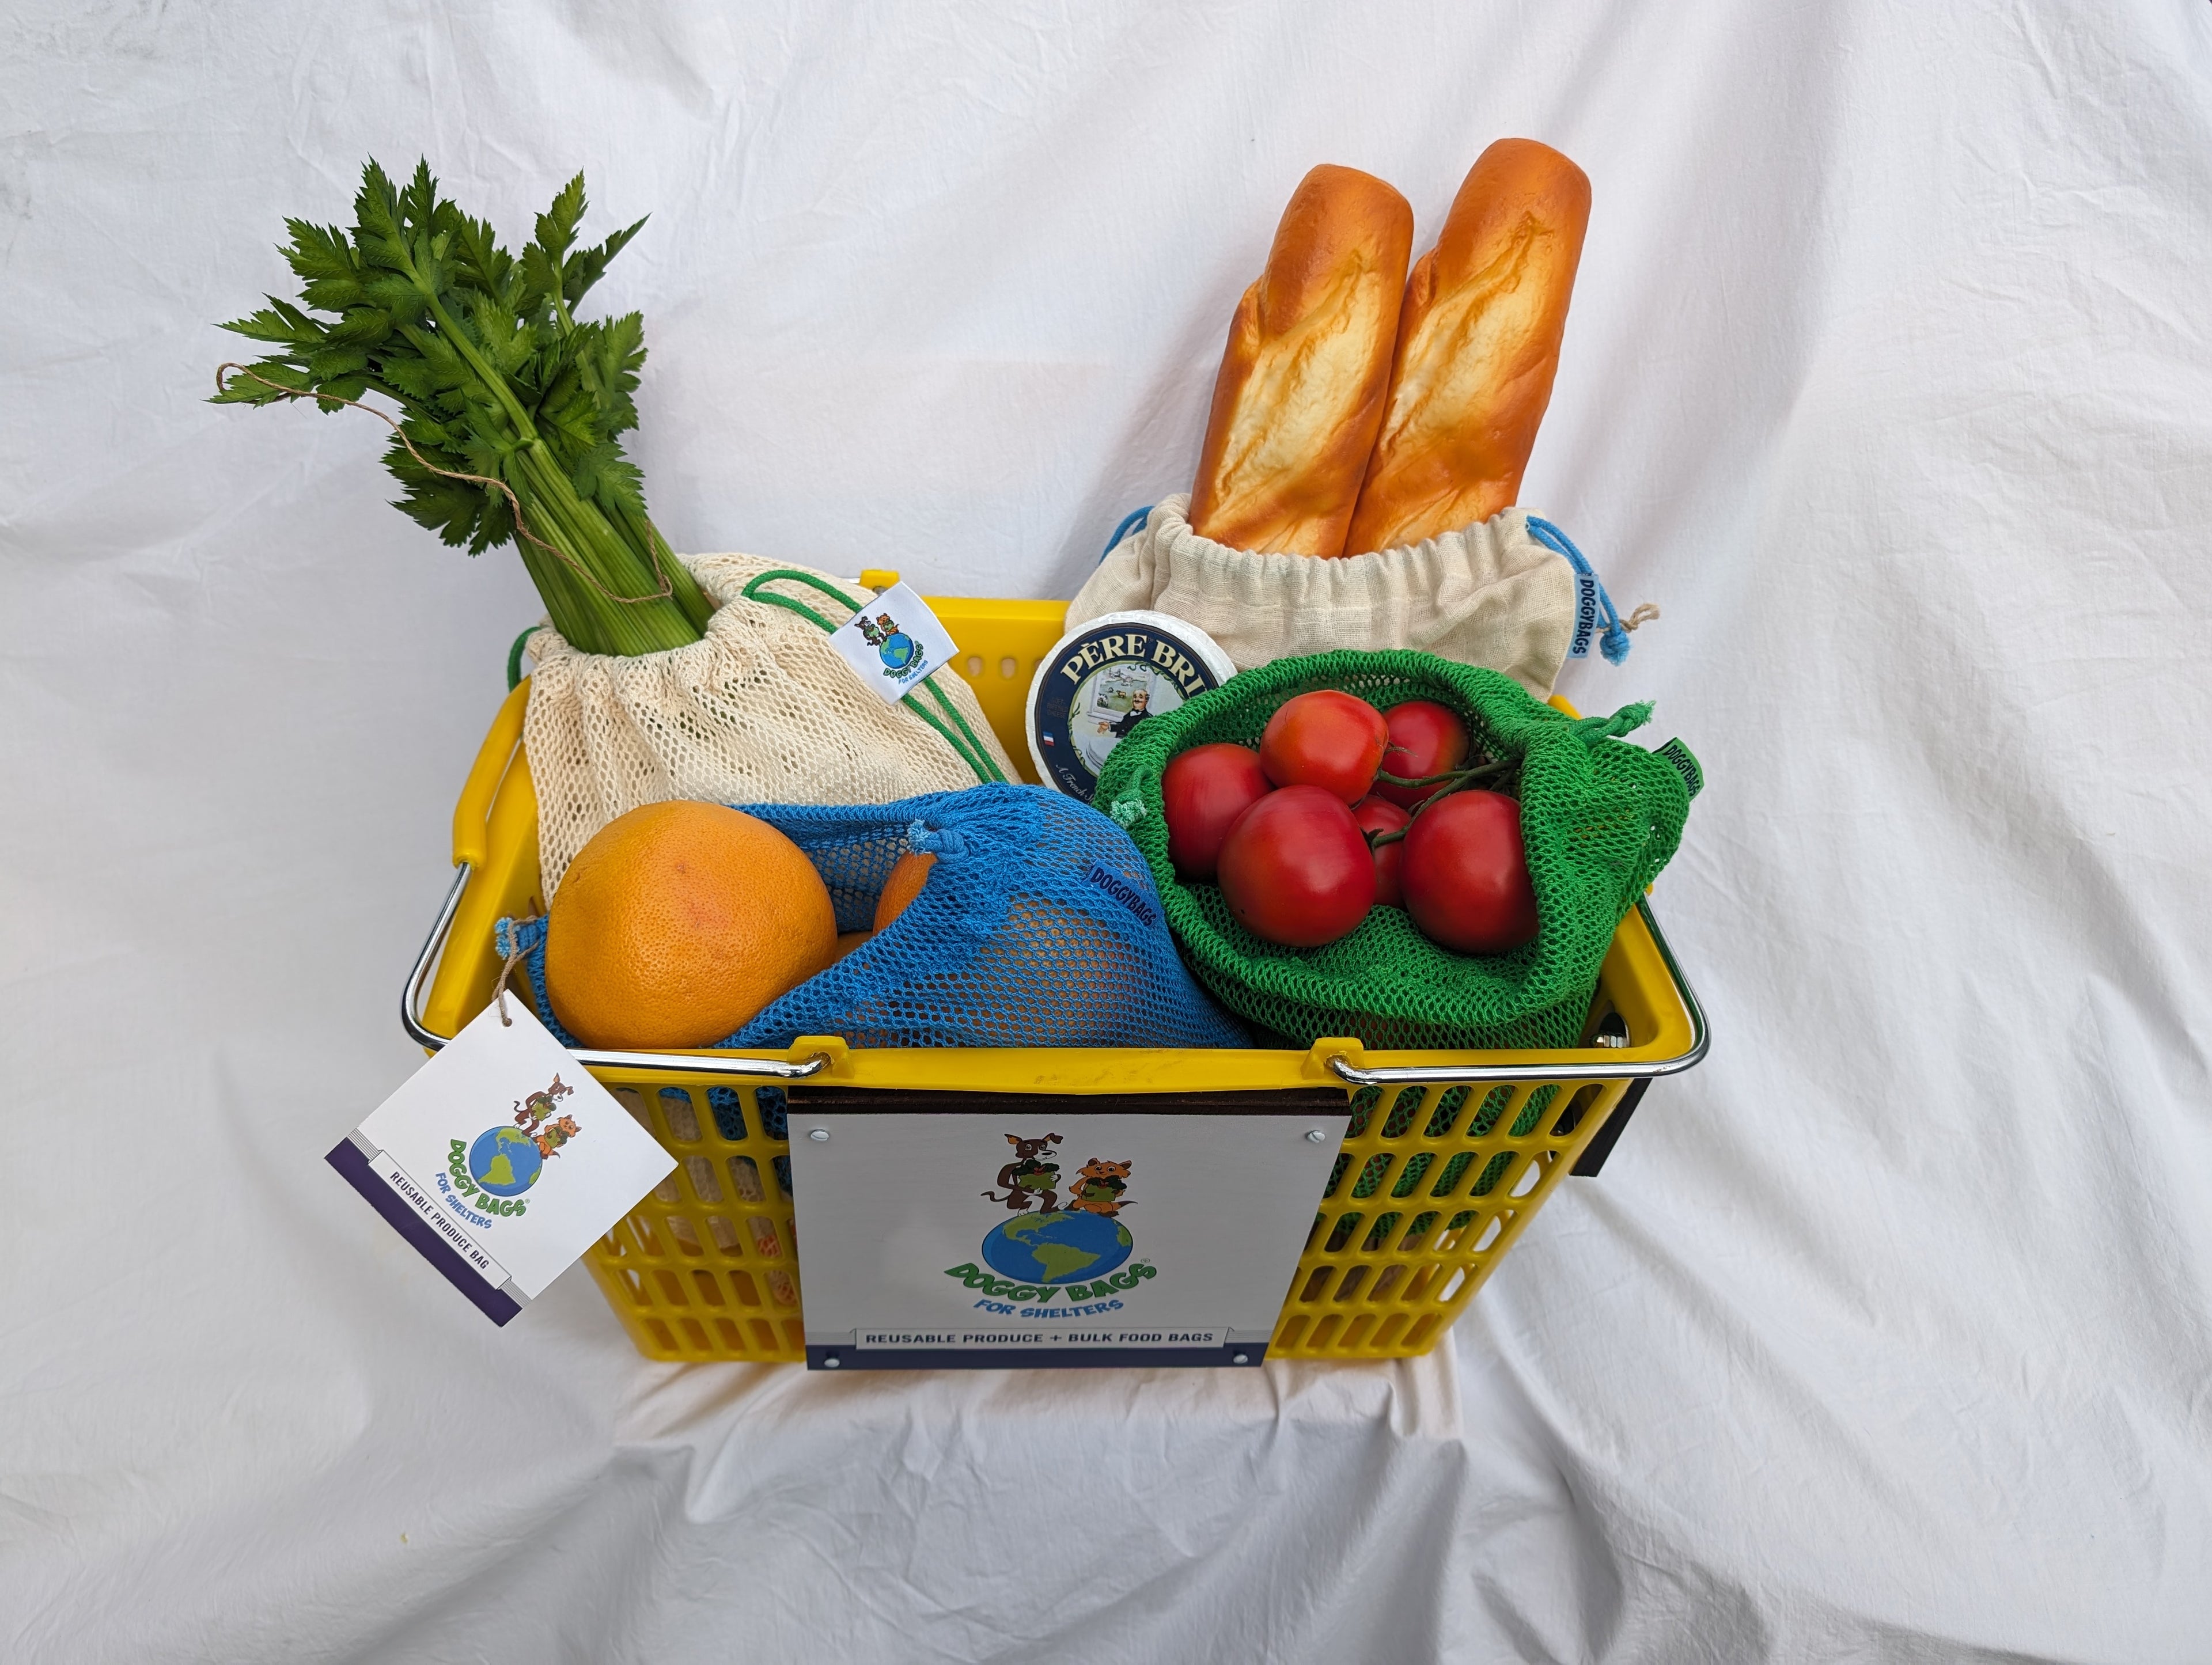 Basket showing bread (2 baguettes) in a bulk food bag, 2 bunches of celery in a natural mesh produce bag, lots of tomatoes in a green produce bag and grapefruit in a blue reusable bag.